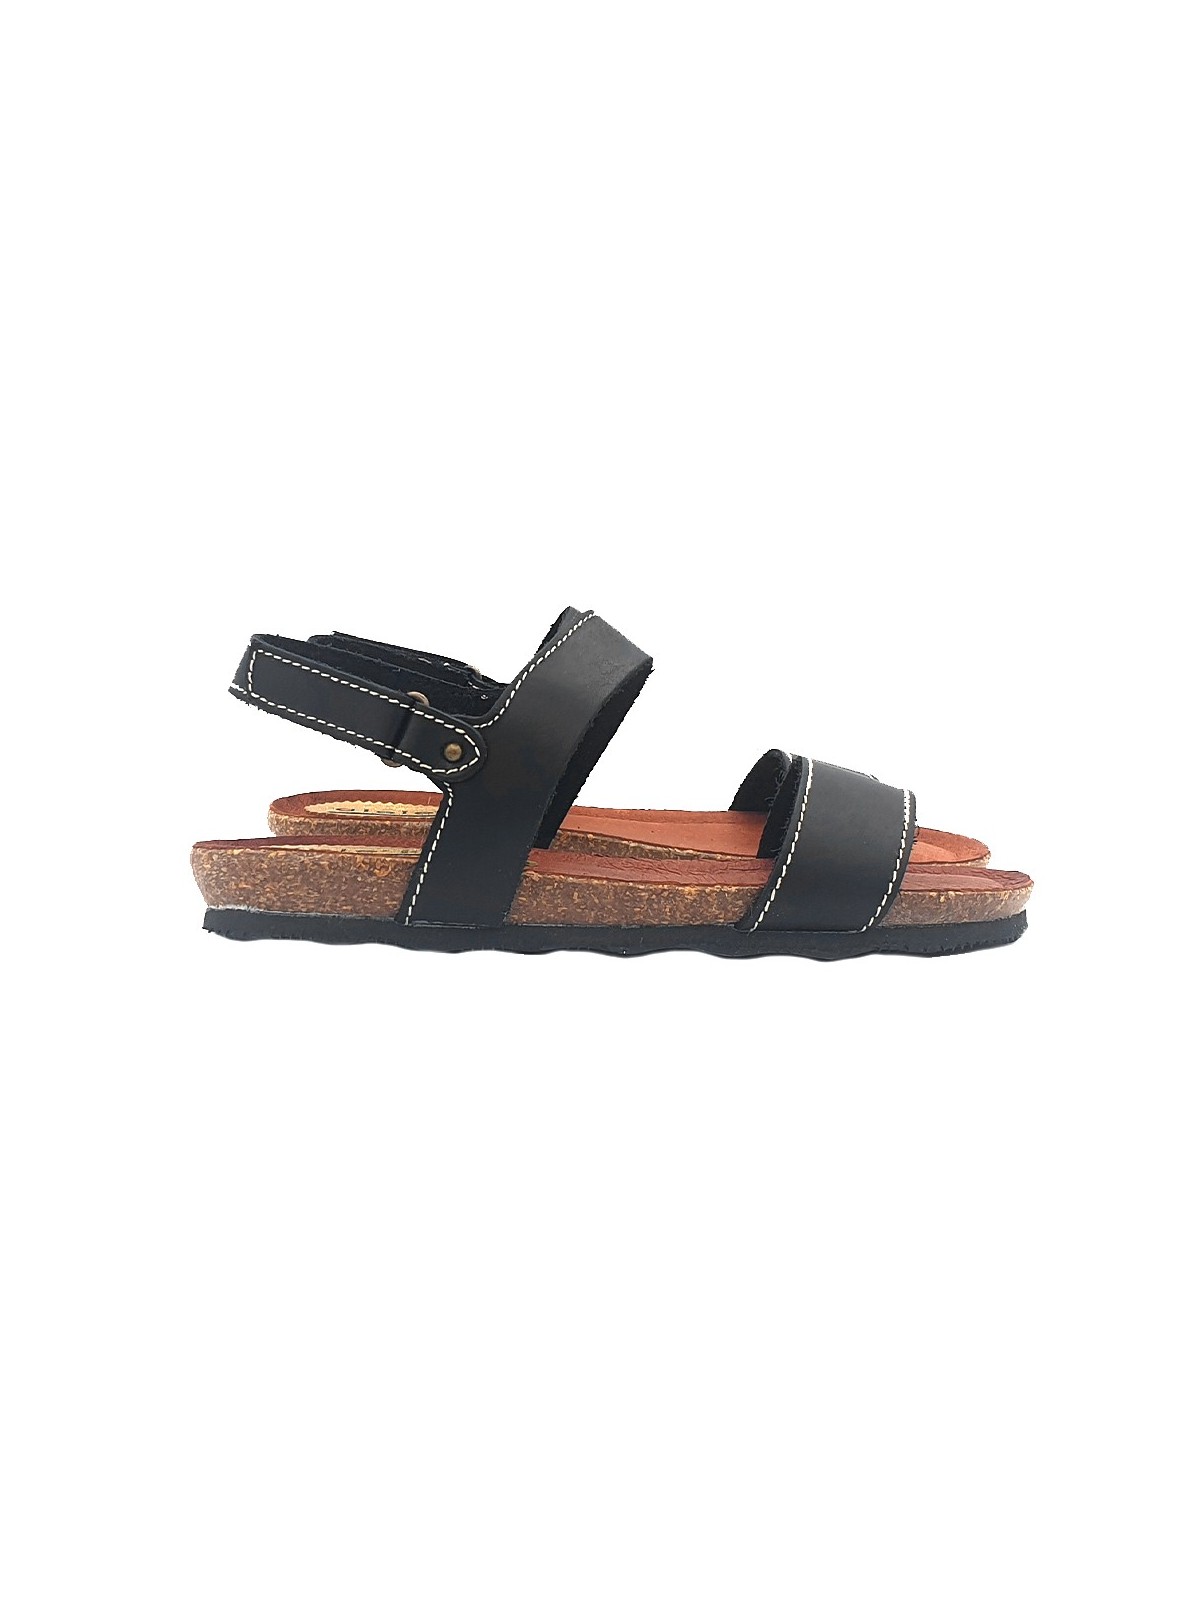 LOW BLACK WOMAN SANDALS WITH LEATHER BAND